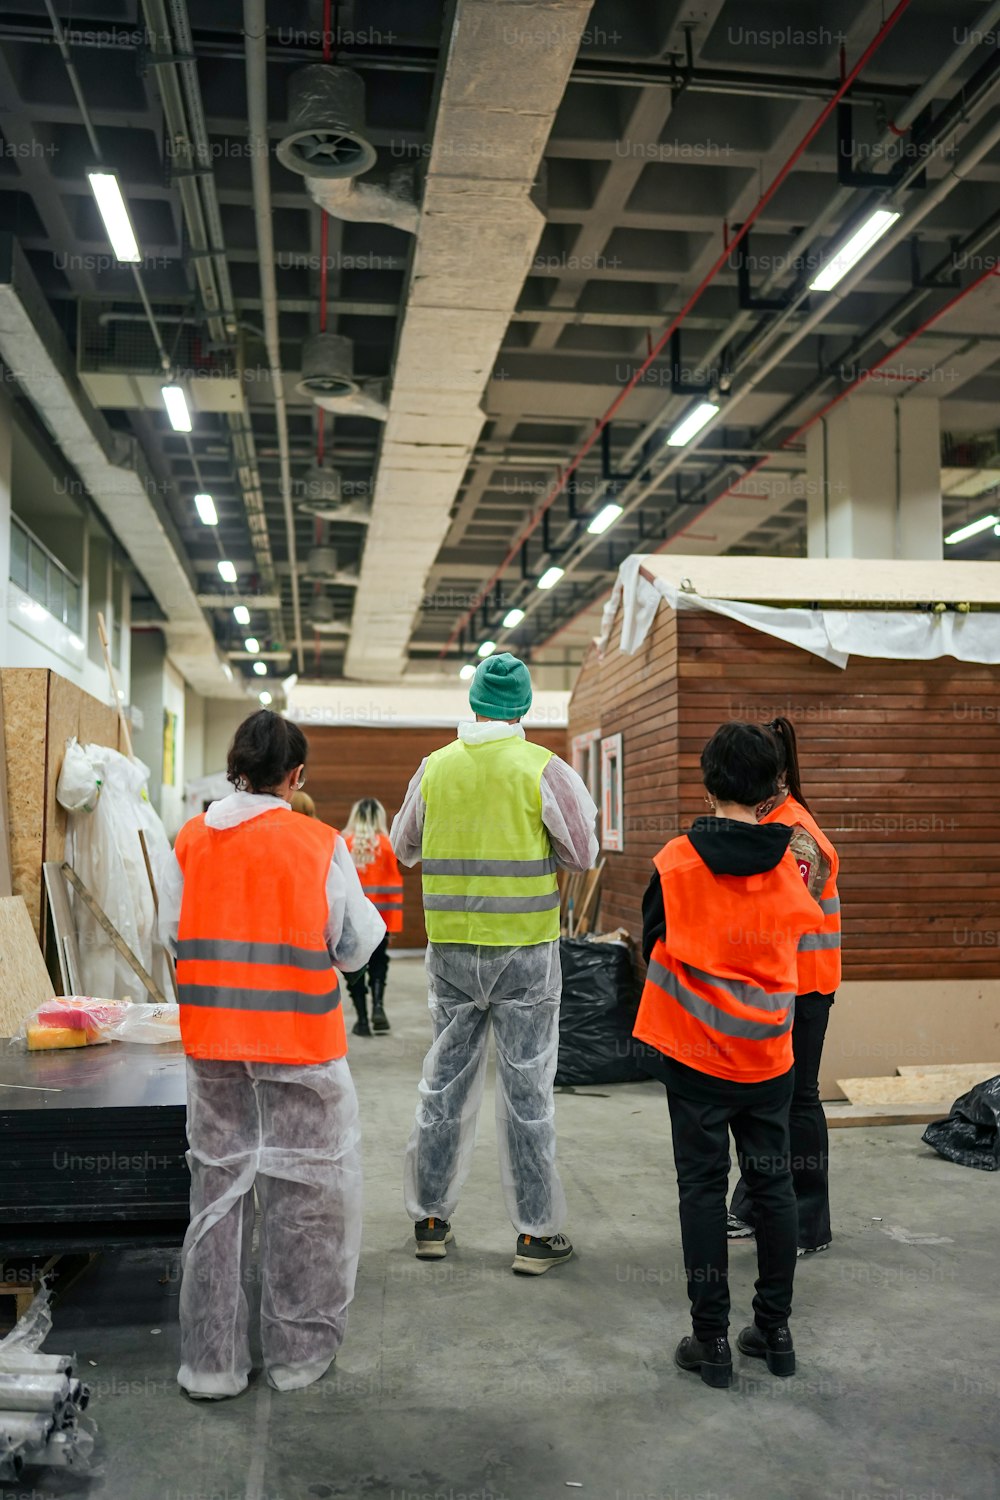 a group of people in orange vests standing in a warehouse